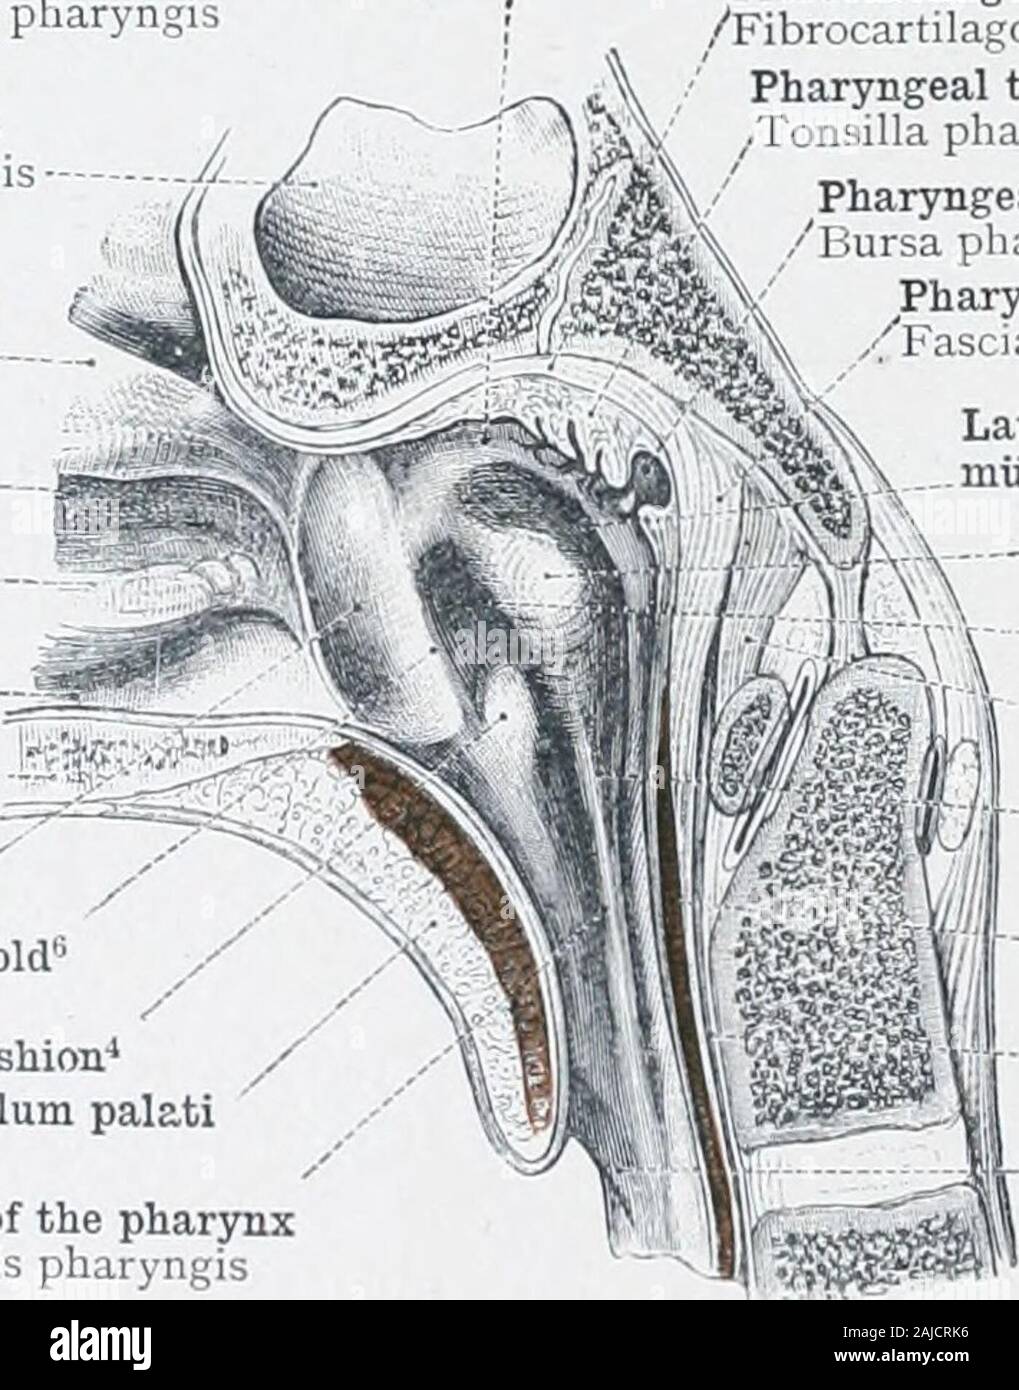 An atlas of human anatomy for students and physicians . yngis superiorPosterior wall of the pharynx Paries dorsalis pharyngis Fig 700—Pars Nasalis Pharyngis, the Nasal Part of the Pharynx, Nasopharynx, or Post-Nasal Space, SEEN FROM BEFORE. CORONAL SECTION THROUGH THE HEAD. TONSILLA PHARYNGEA, THE PHARYNGEAL TONSIL. On the left side, the greater part of the pterygoid process, the anterior wall of the tympanum, and the outer wall of the Eustachian tube, have been removed. Arched summit of the pharynx Fornix pharyngis Sphenoidal sinus Sinus sphenoidalis ^ Middle turbinate bone of the nose.. Conc Stock Photo